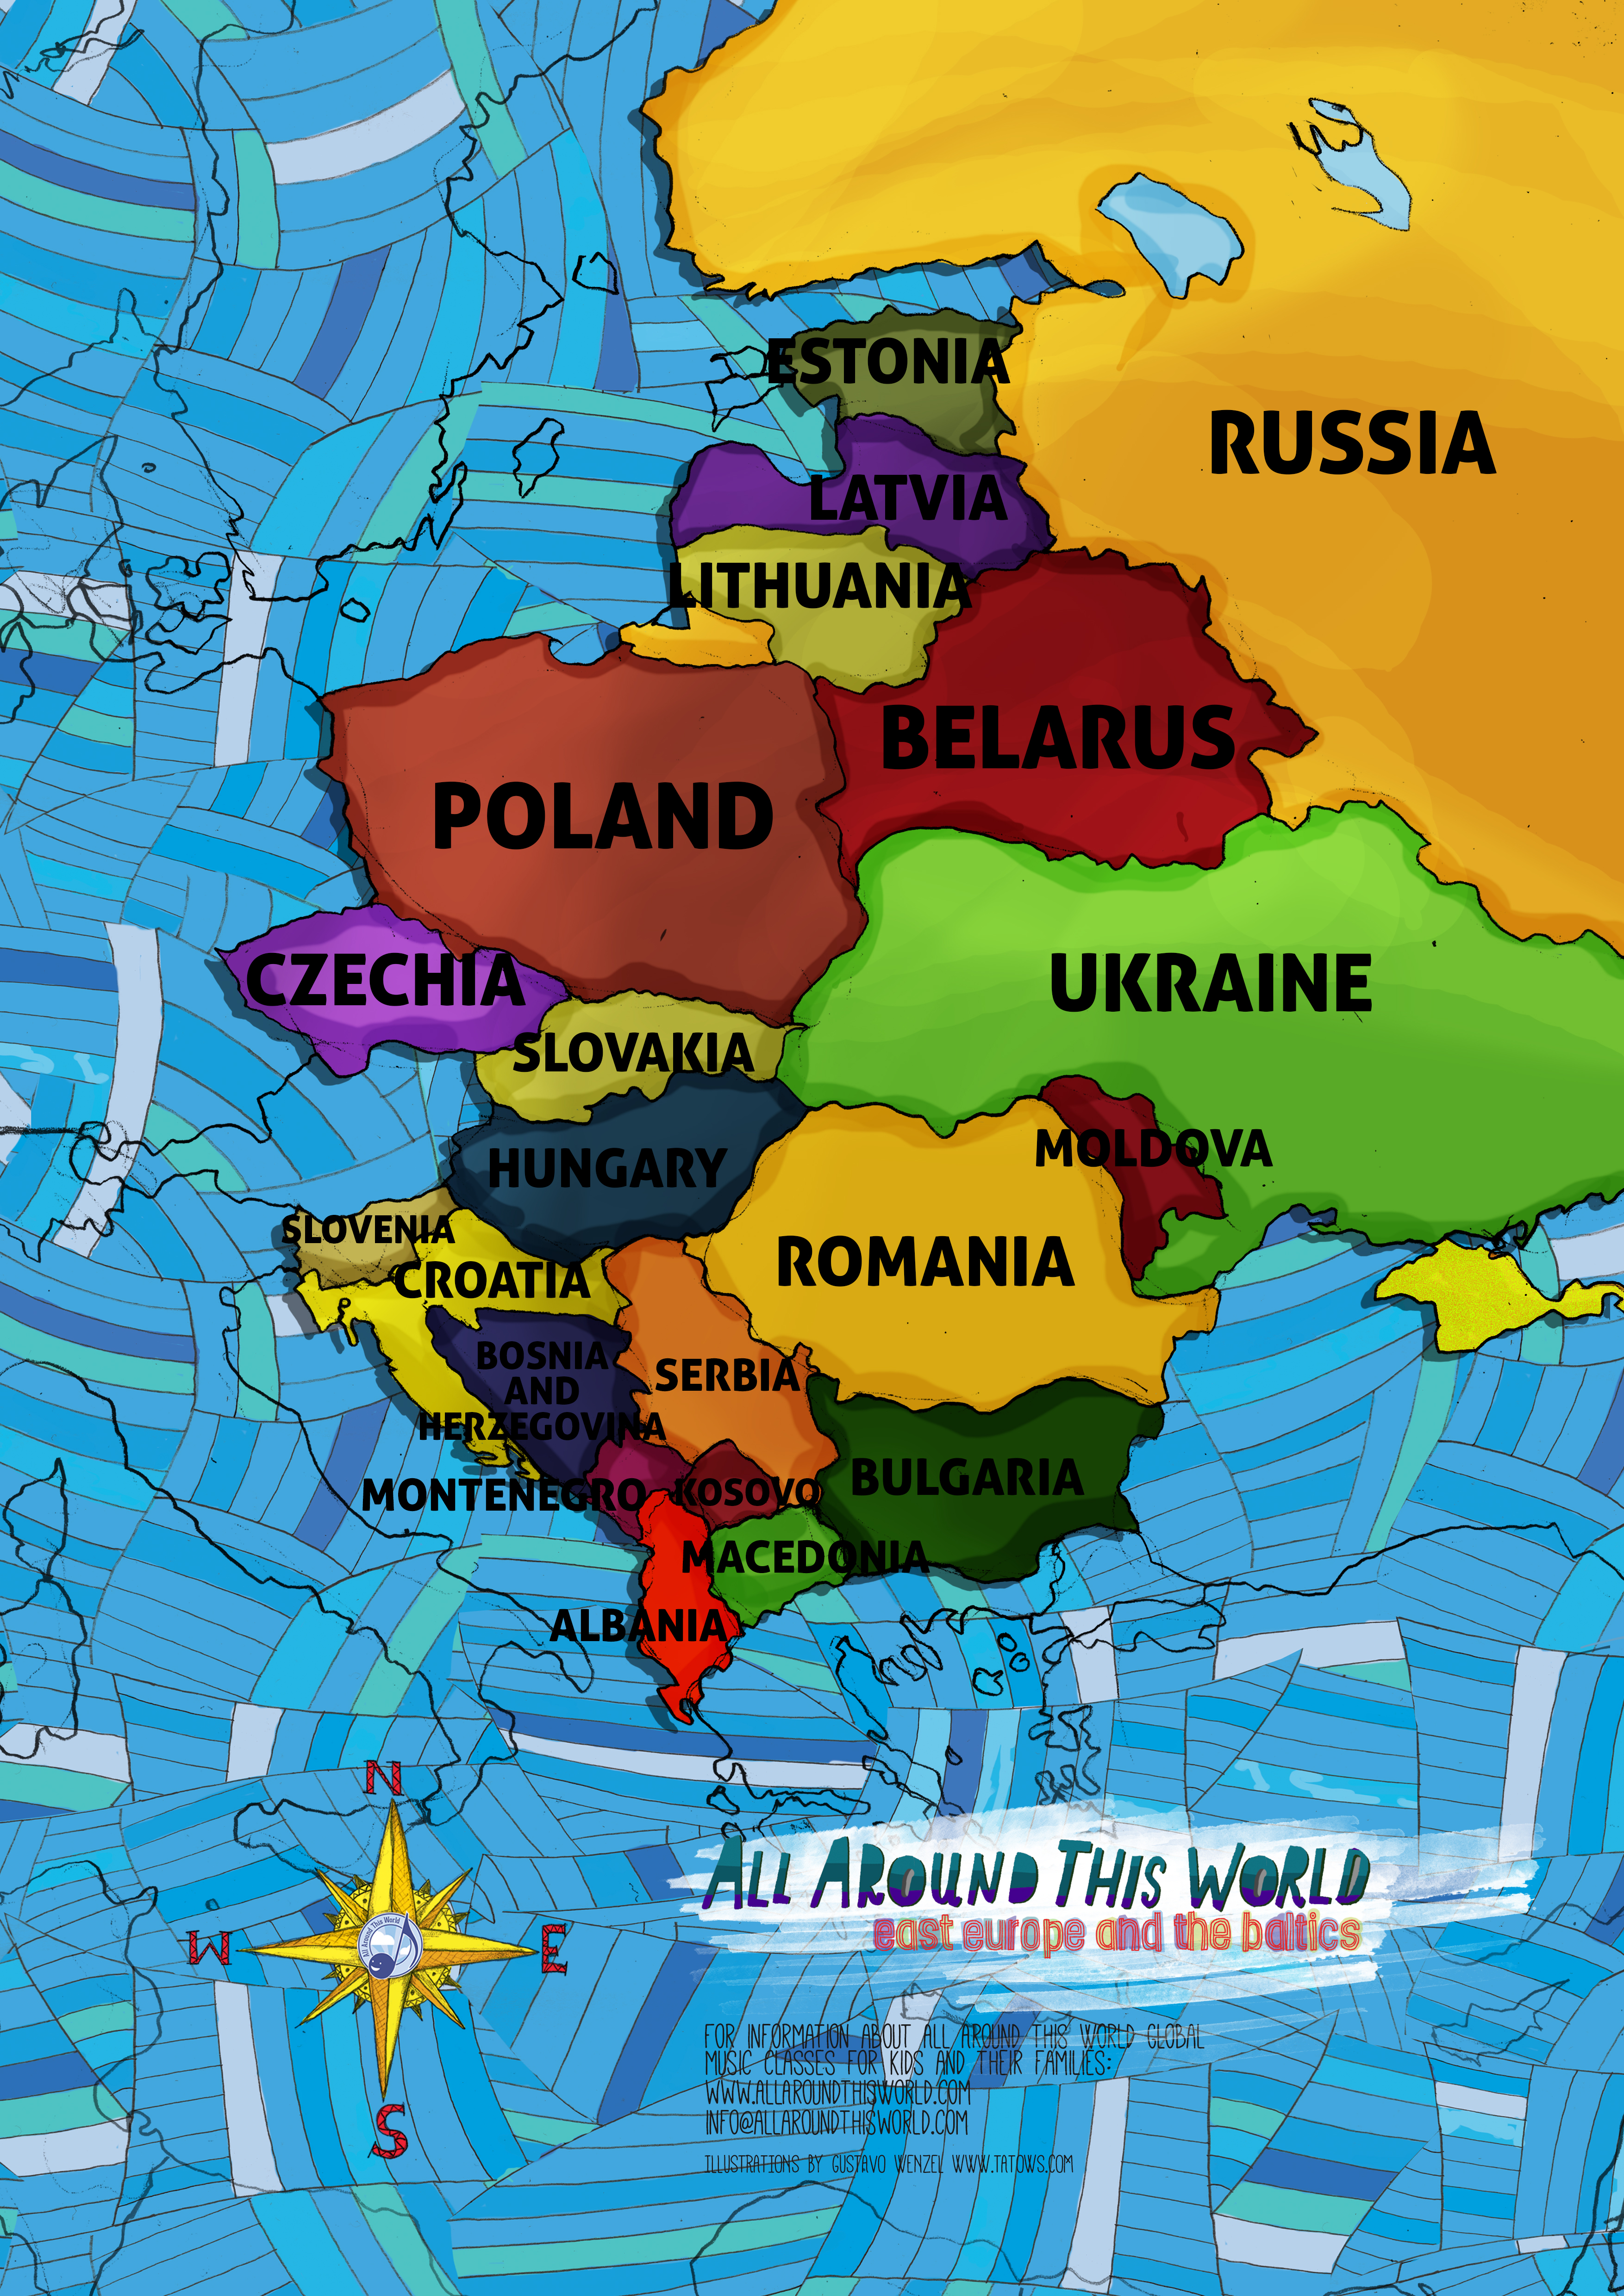 Eastern Europe -- All Around This World